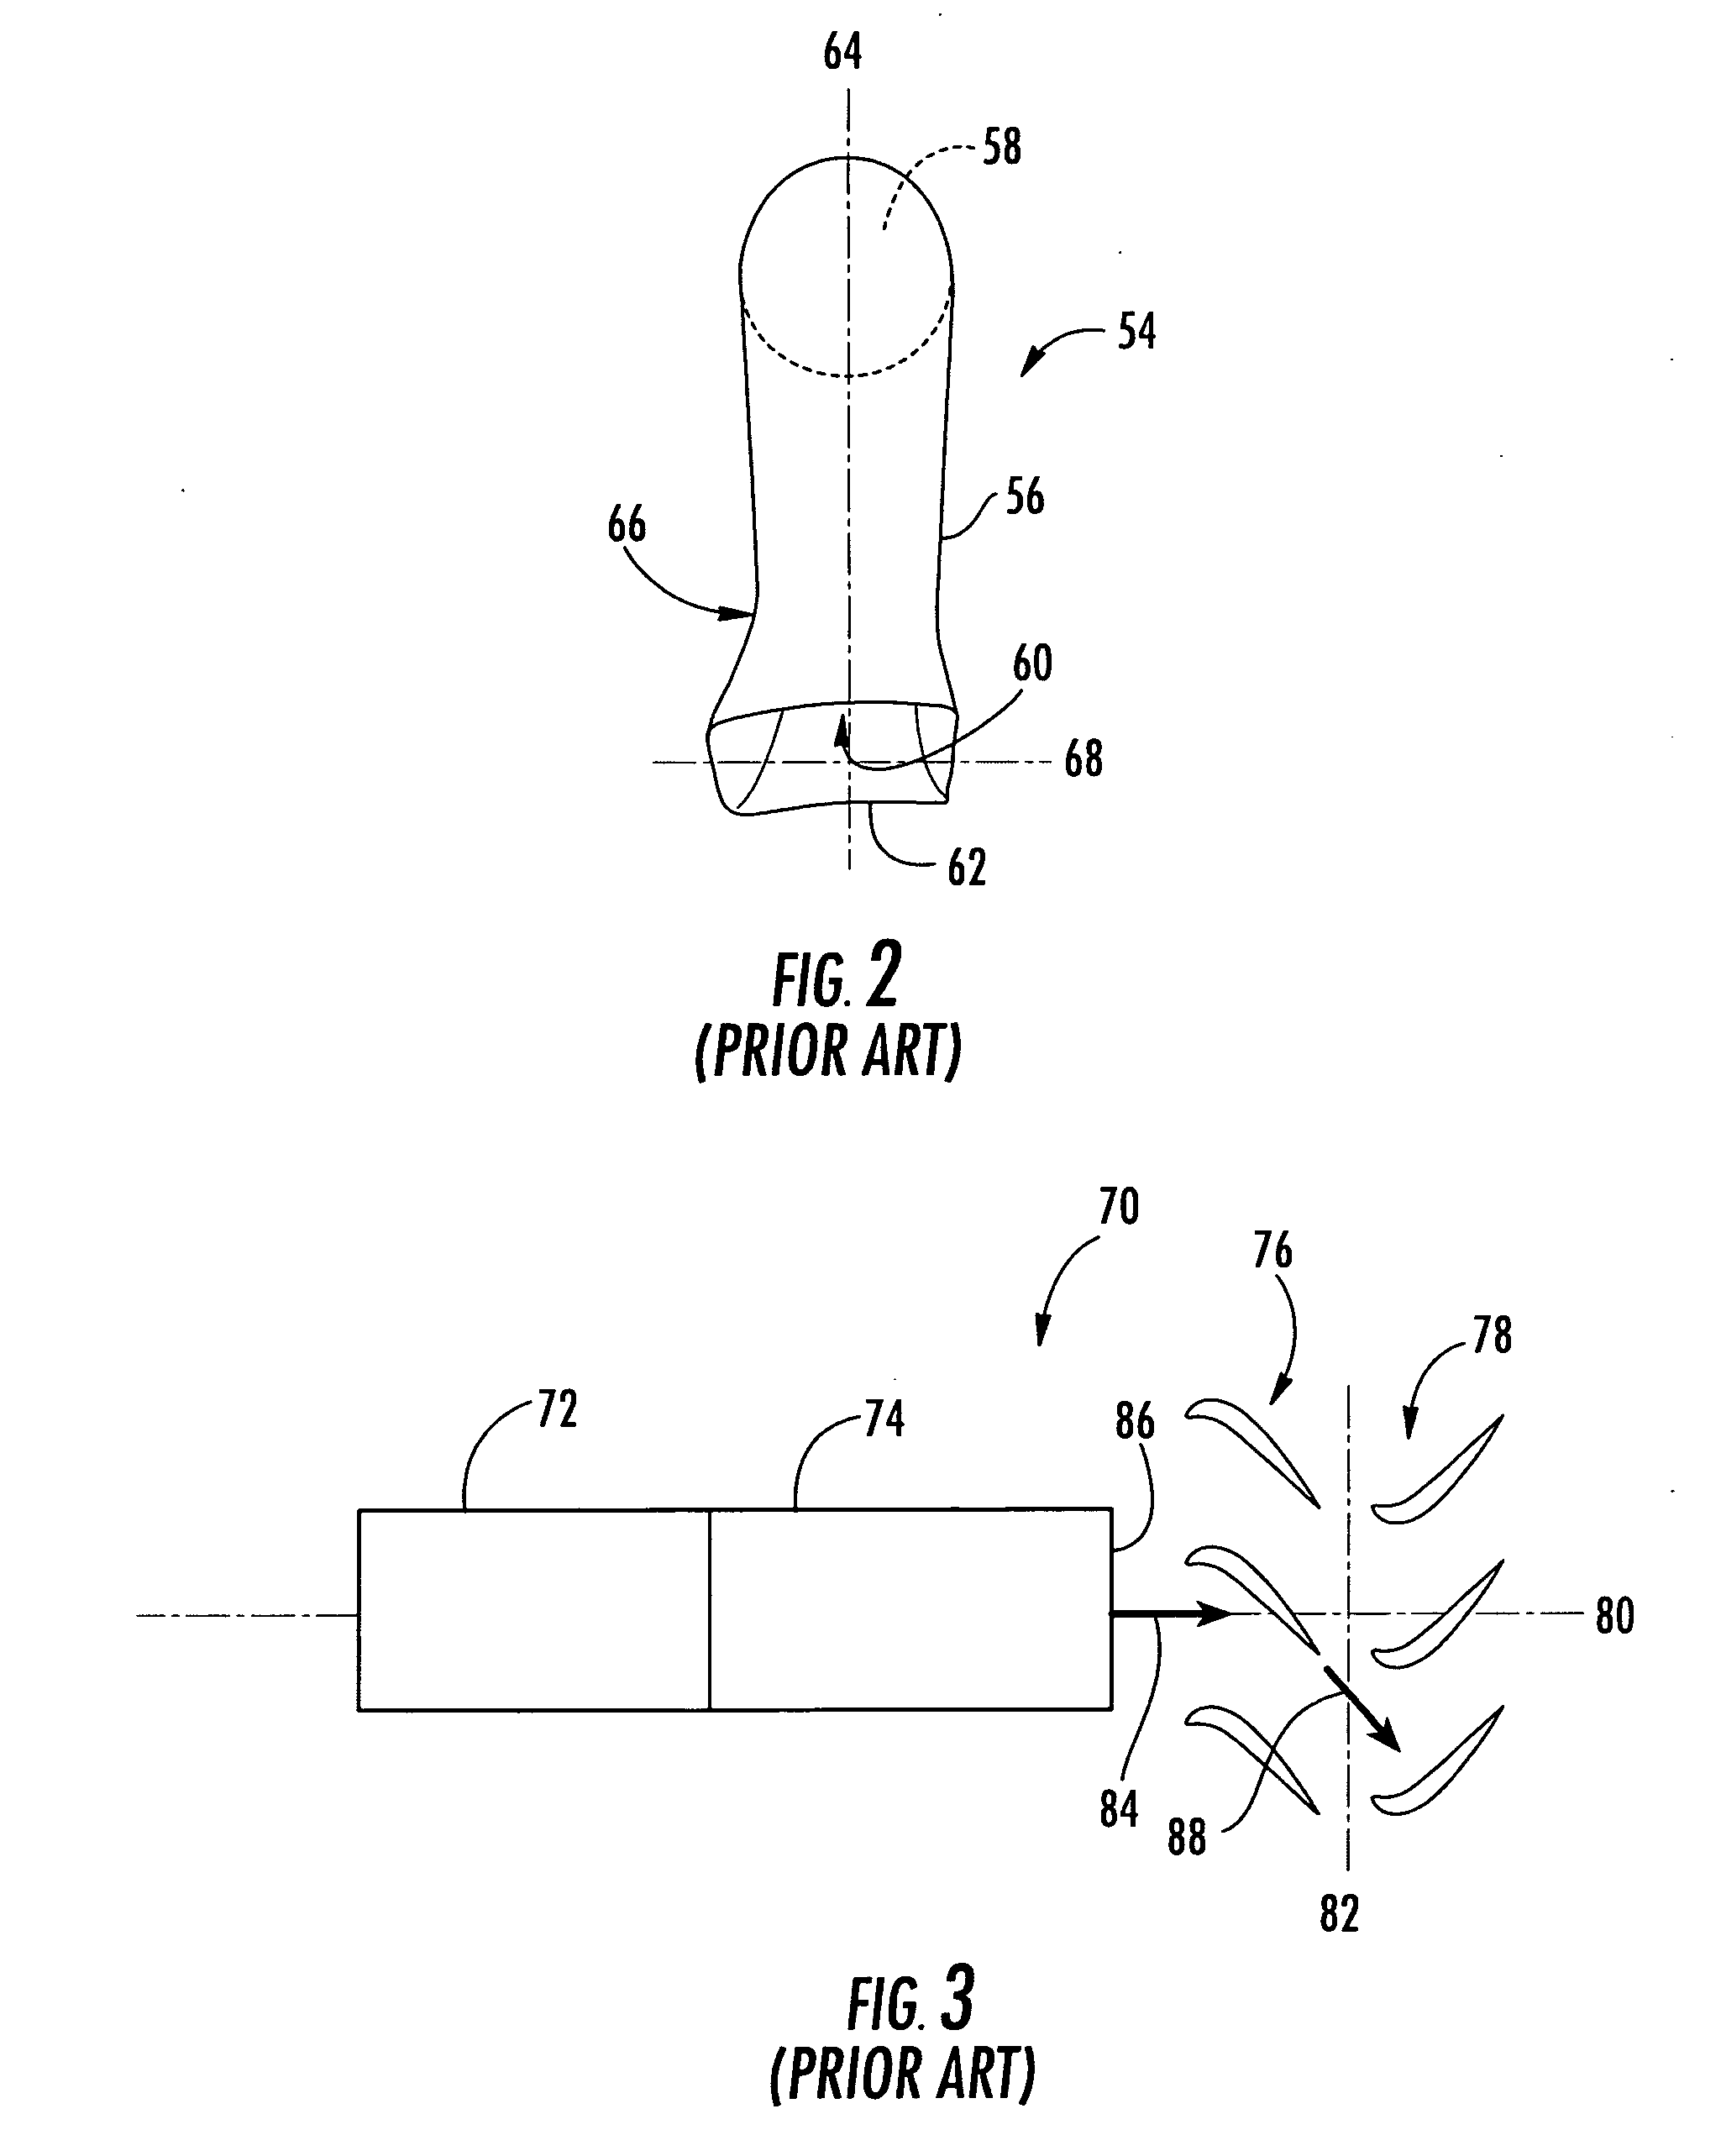 Combustion transition duct providing stage 1 tangential turning for turbine engines